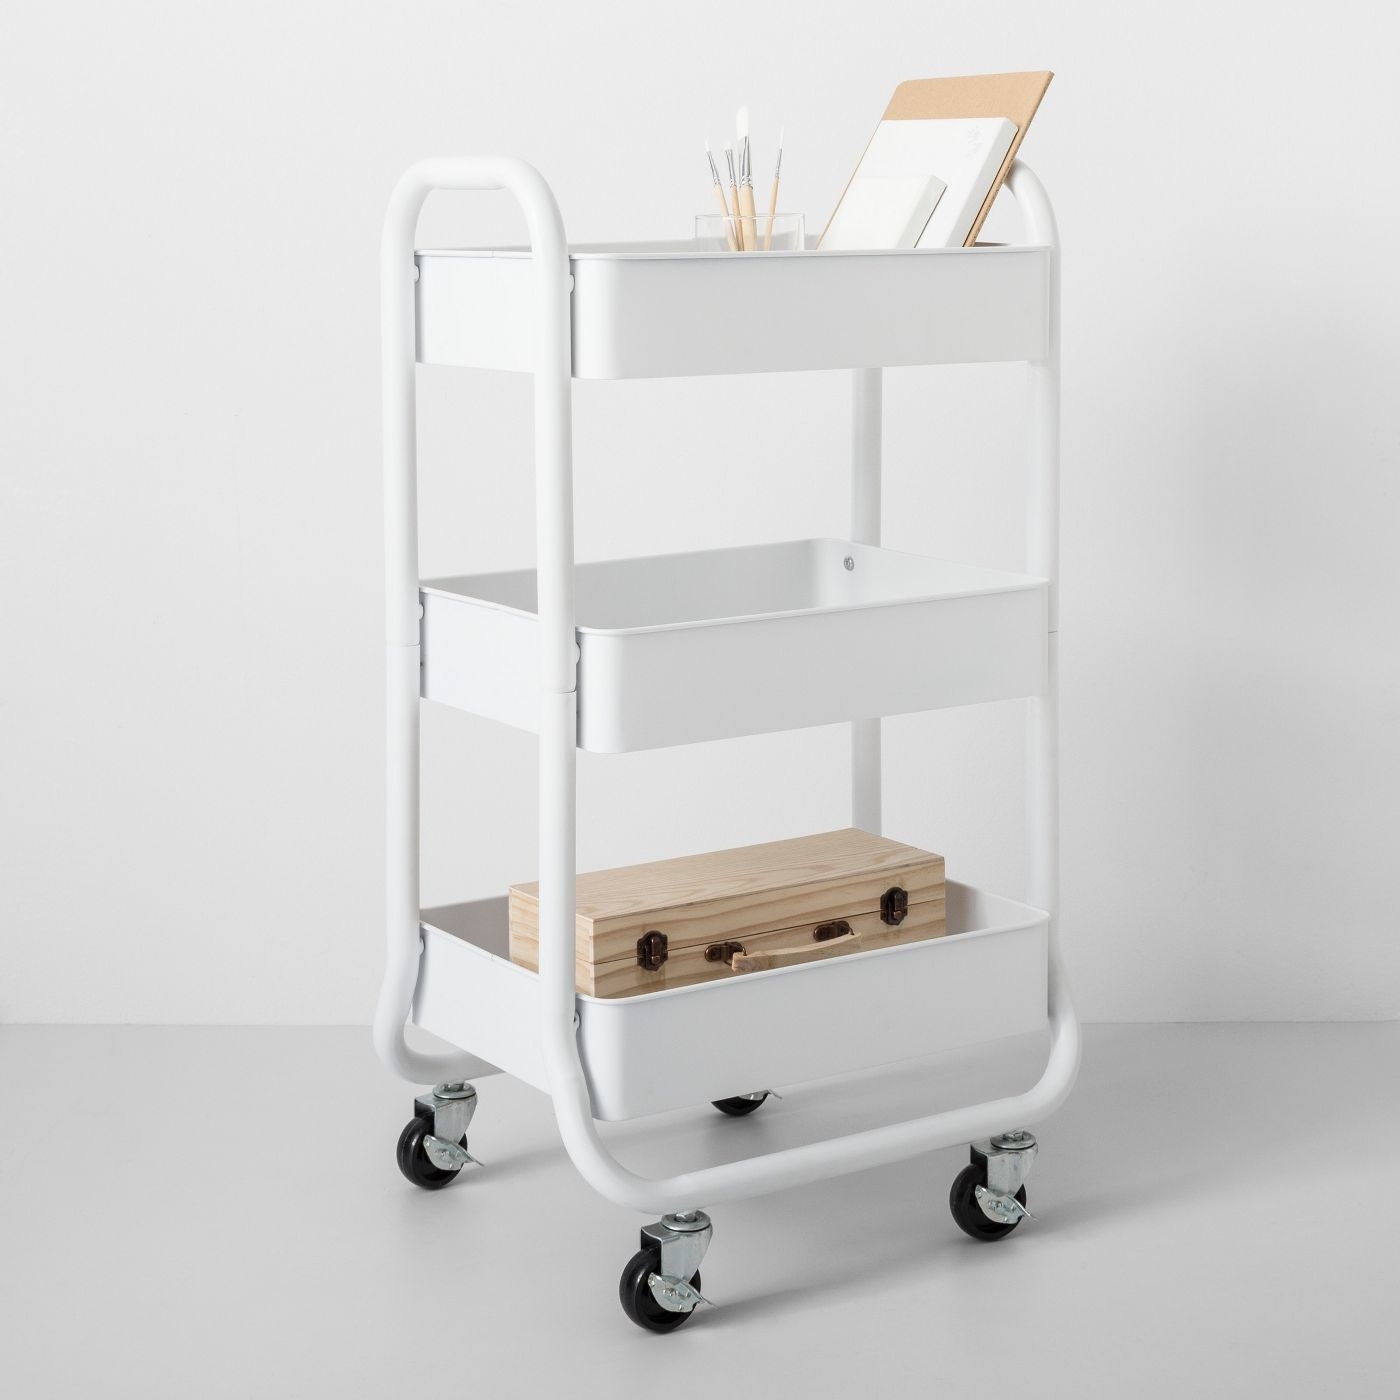 White cart with black casters